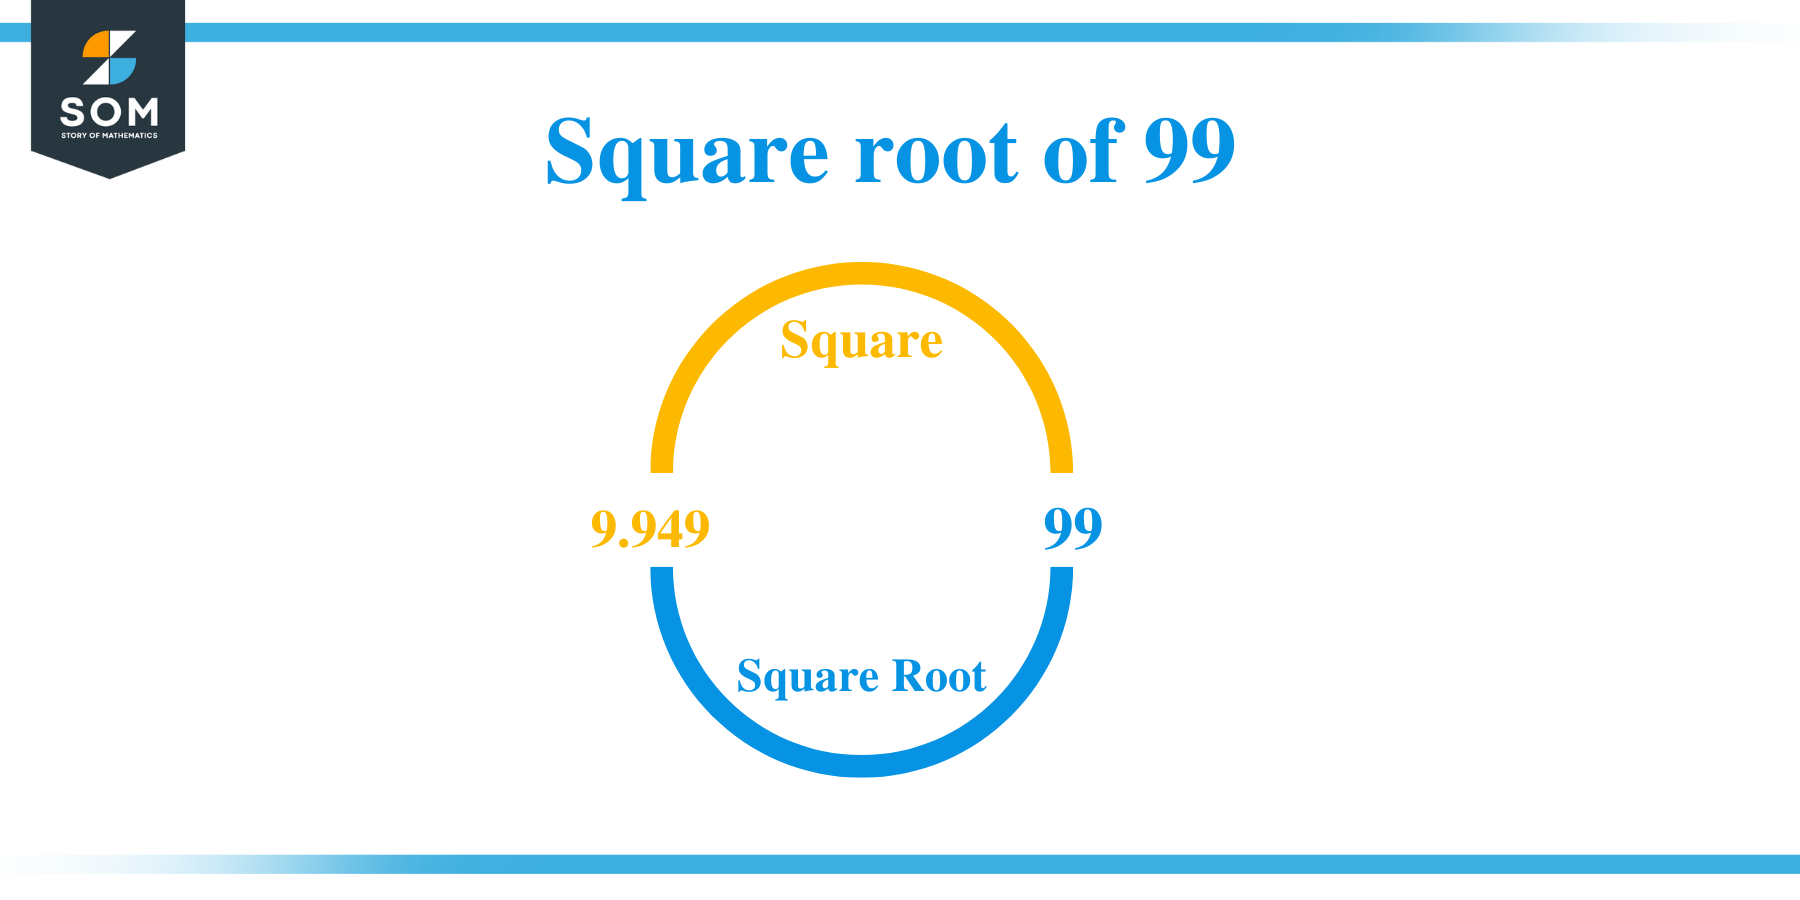 Square root of 99